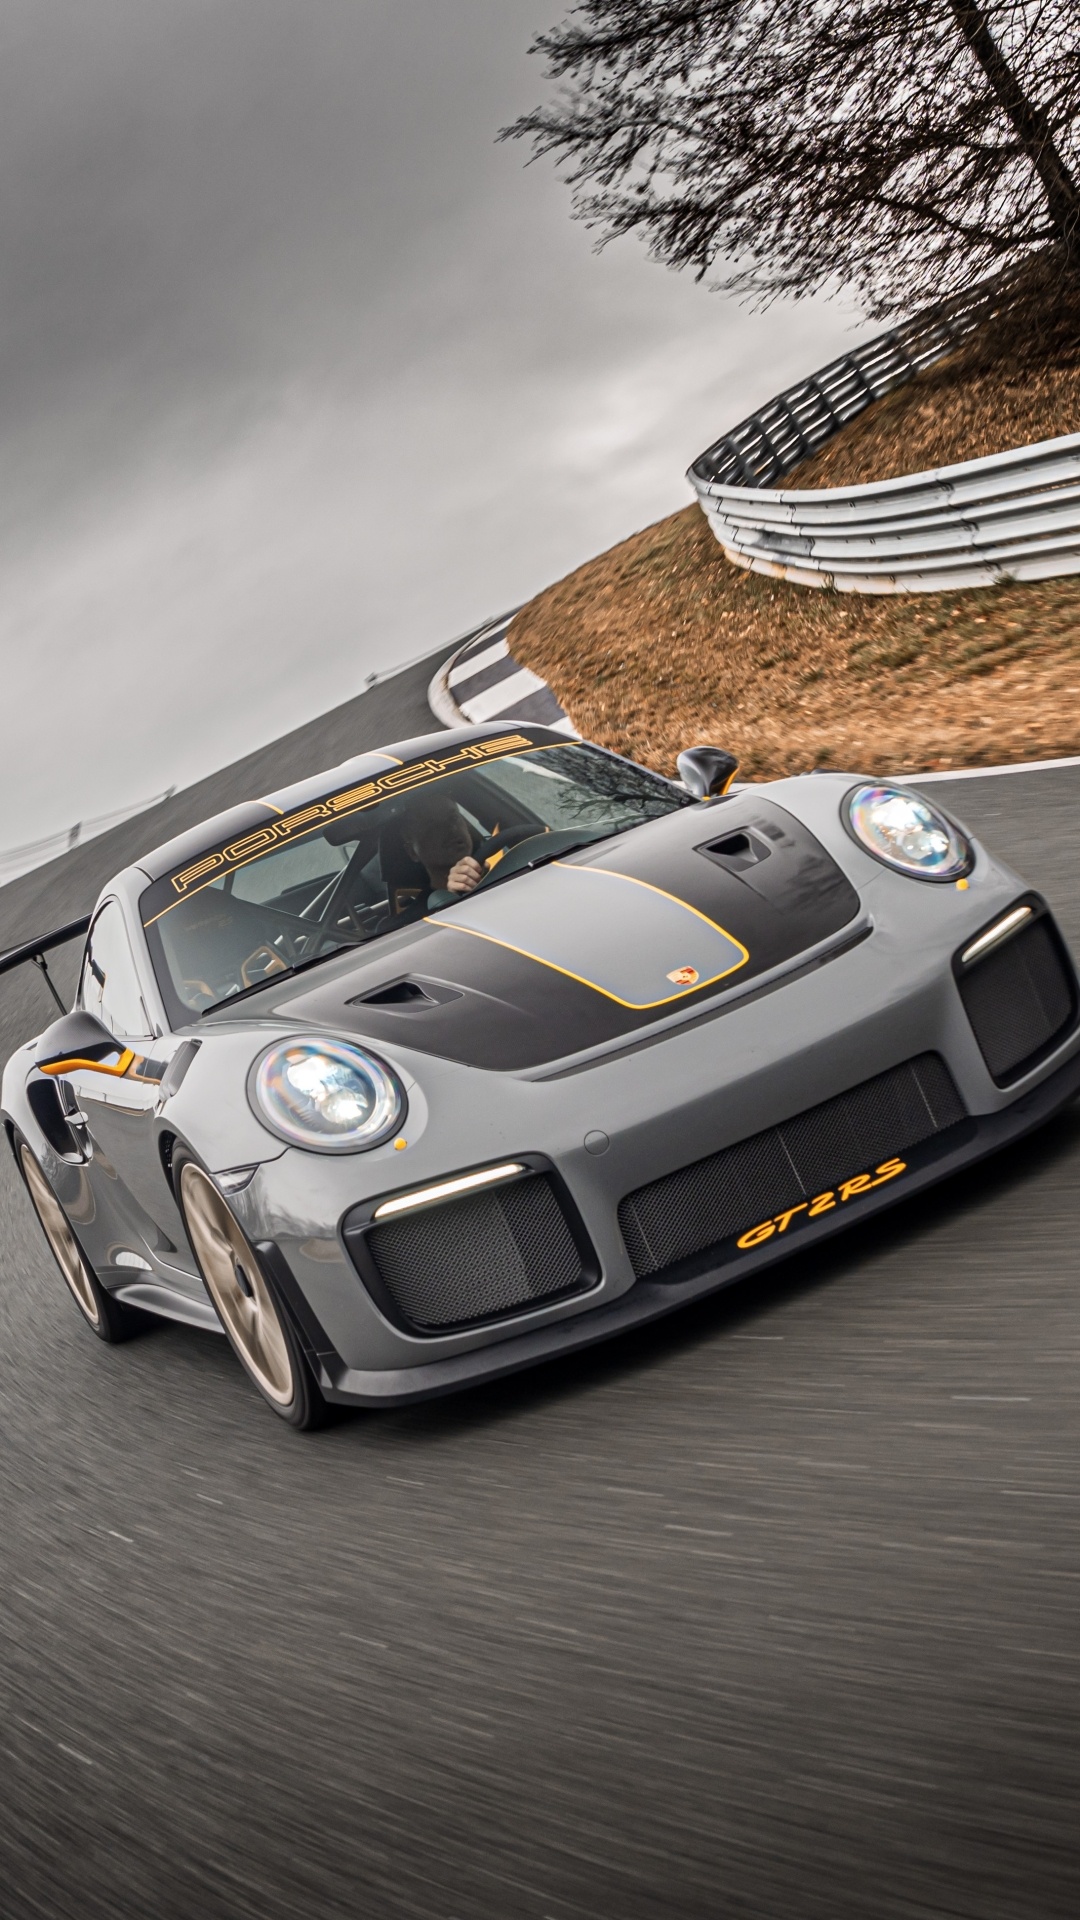 Sports Car: Porsche 911 GT2 RS, A symbol of passion and automotive excellence. 1080x1920 Full HD Wallpaper.